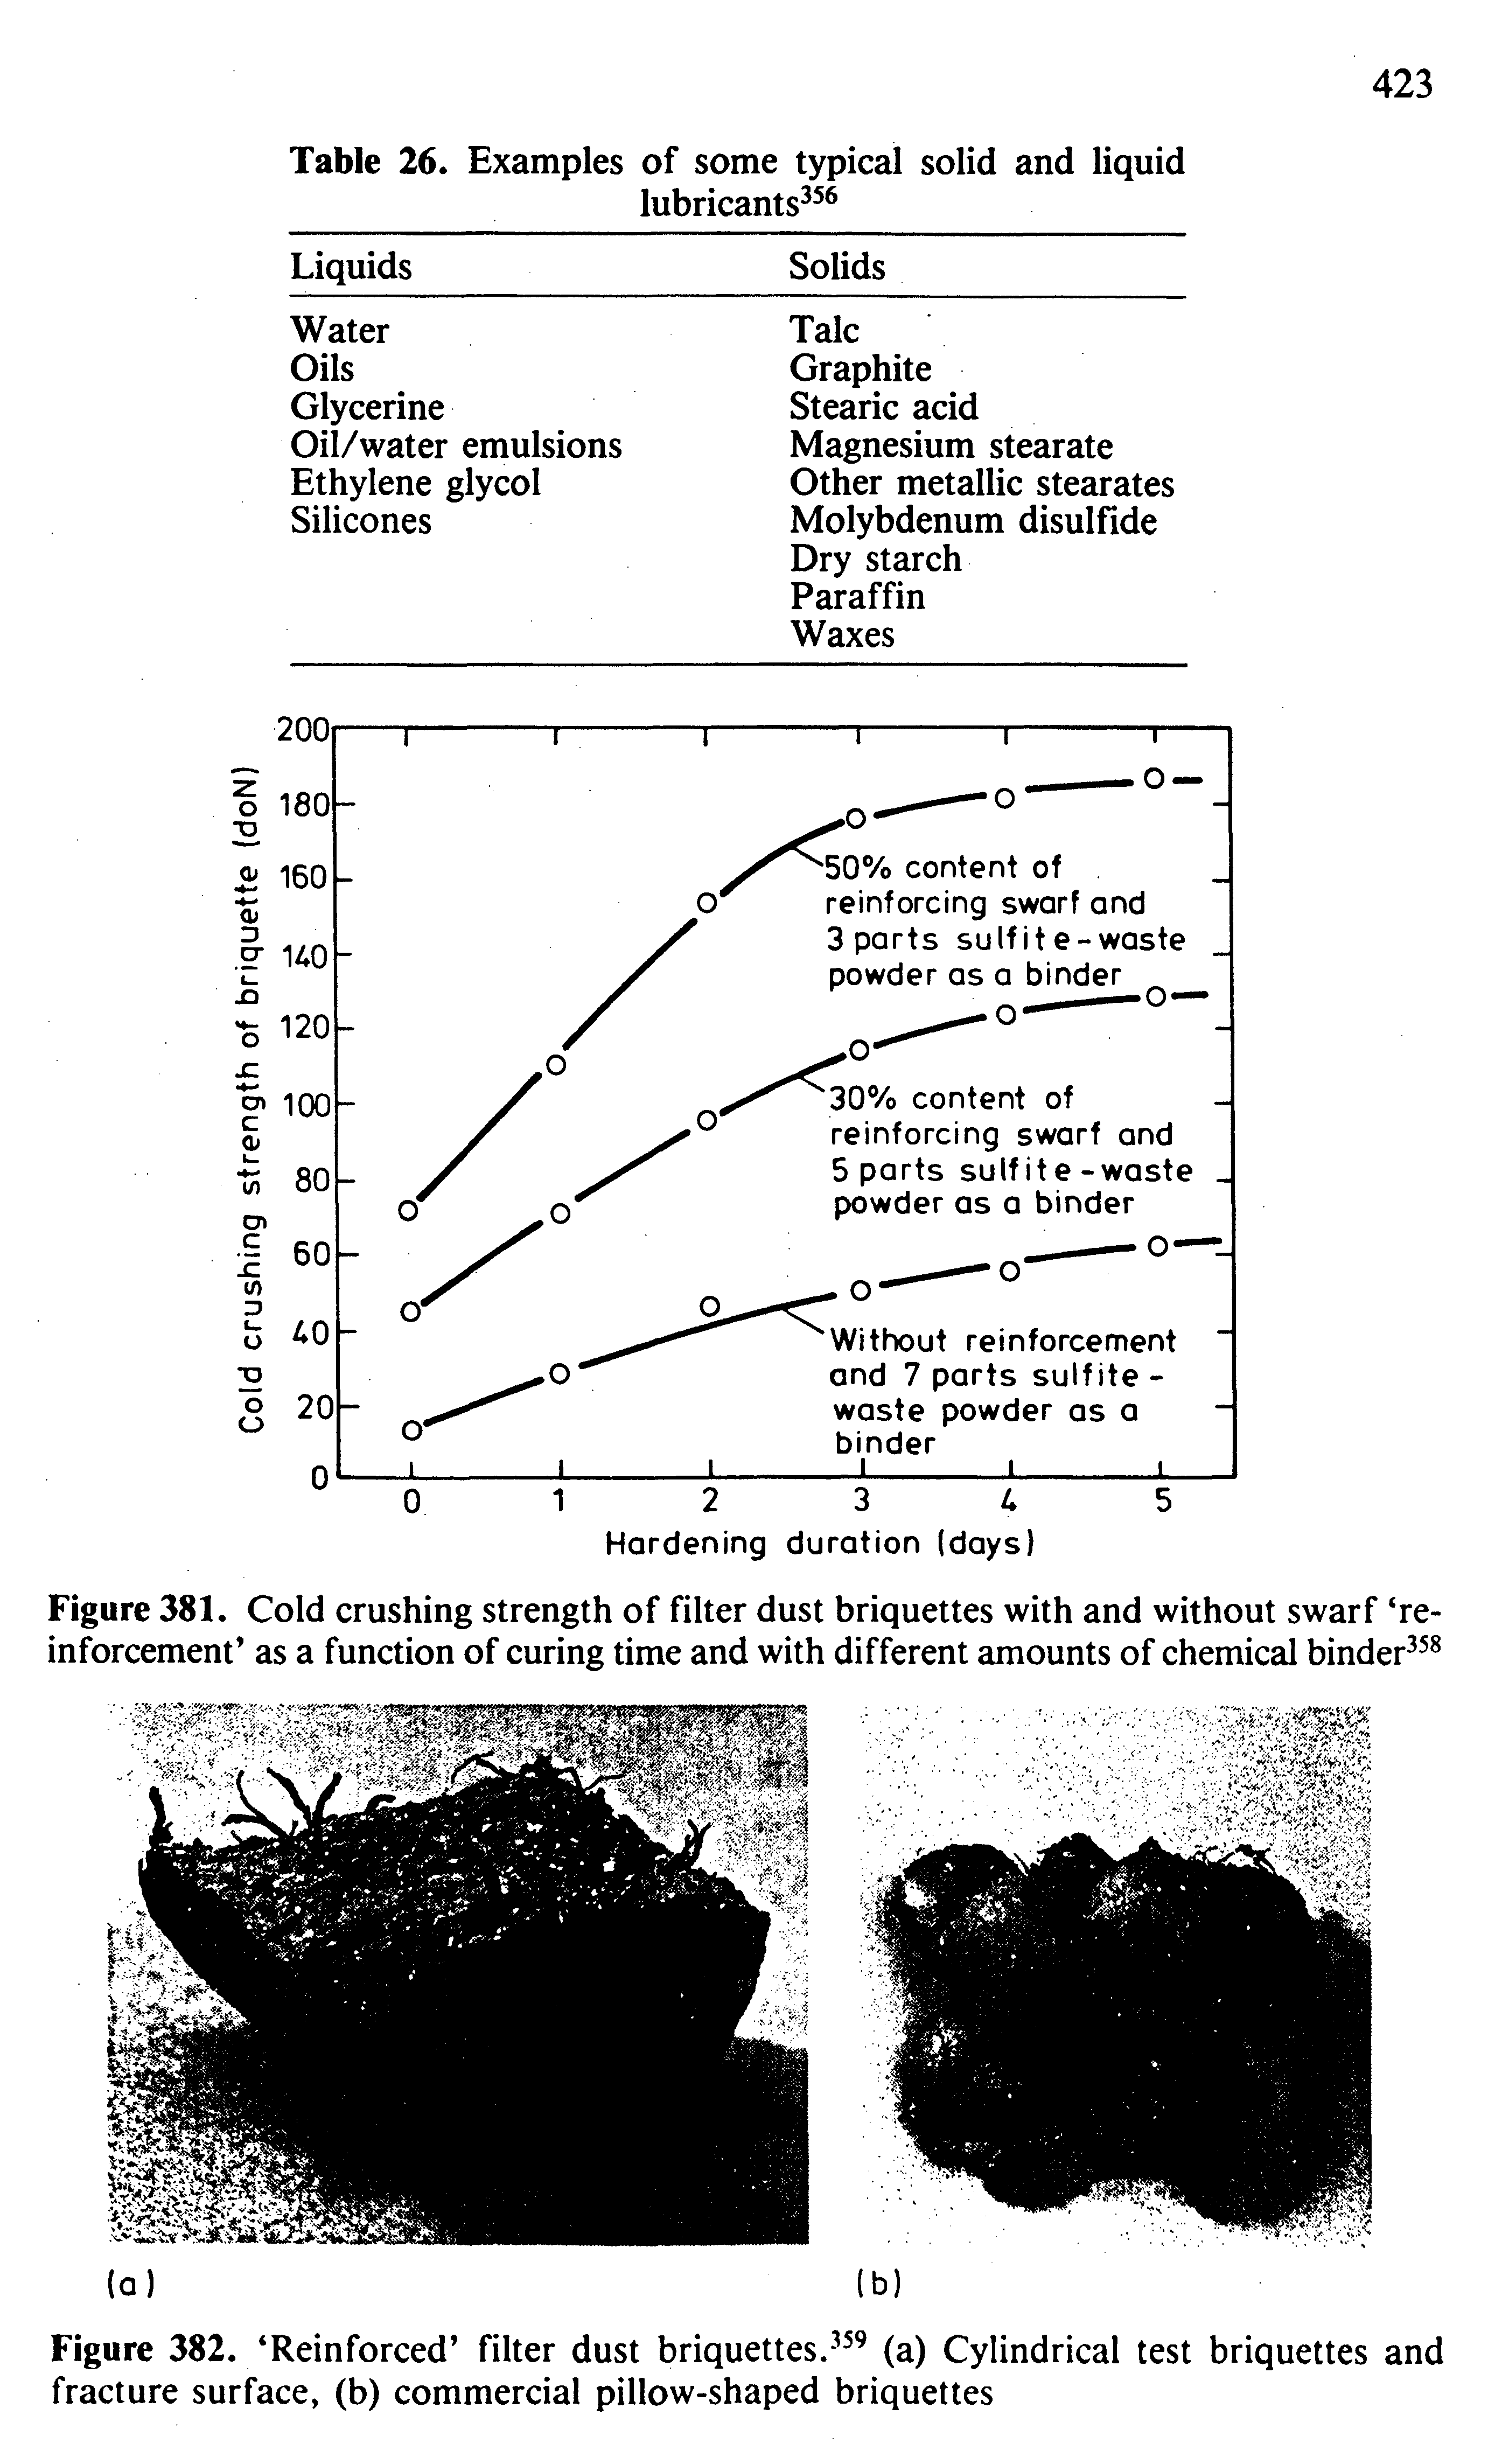 Figure 381. Cold crushing strength of filter dust briquettes with and without swarf reinforcement as a function of curing time and with different amounts of chemical binder ...